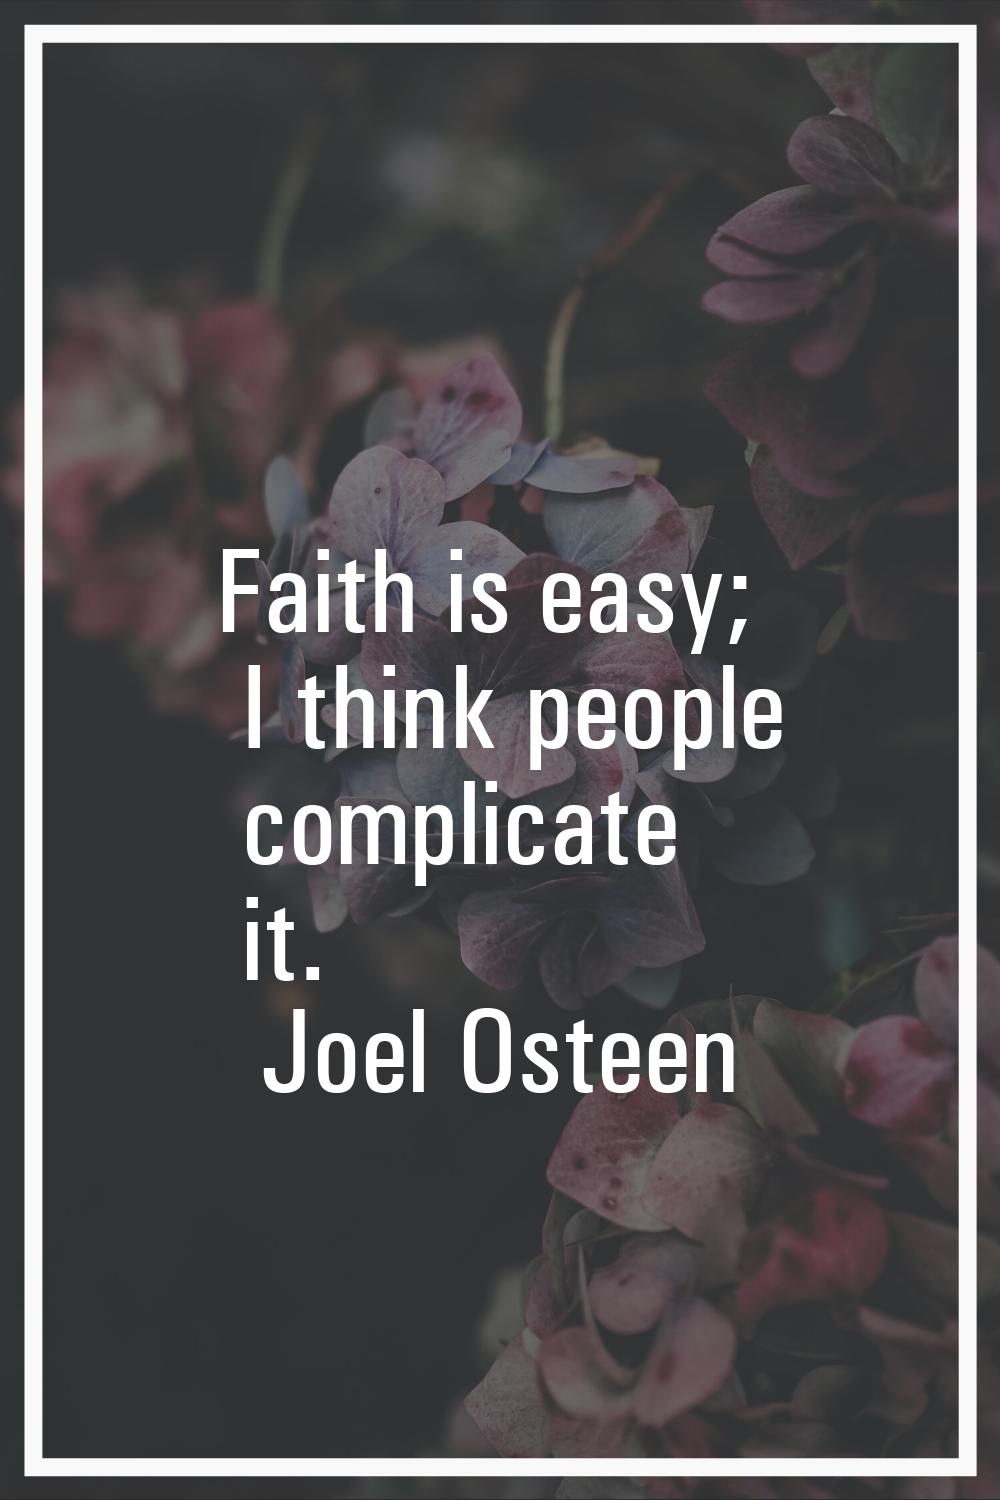 Faith is easy; I think people complicate it.